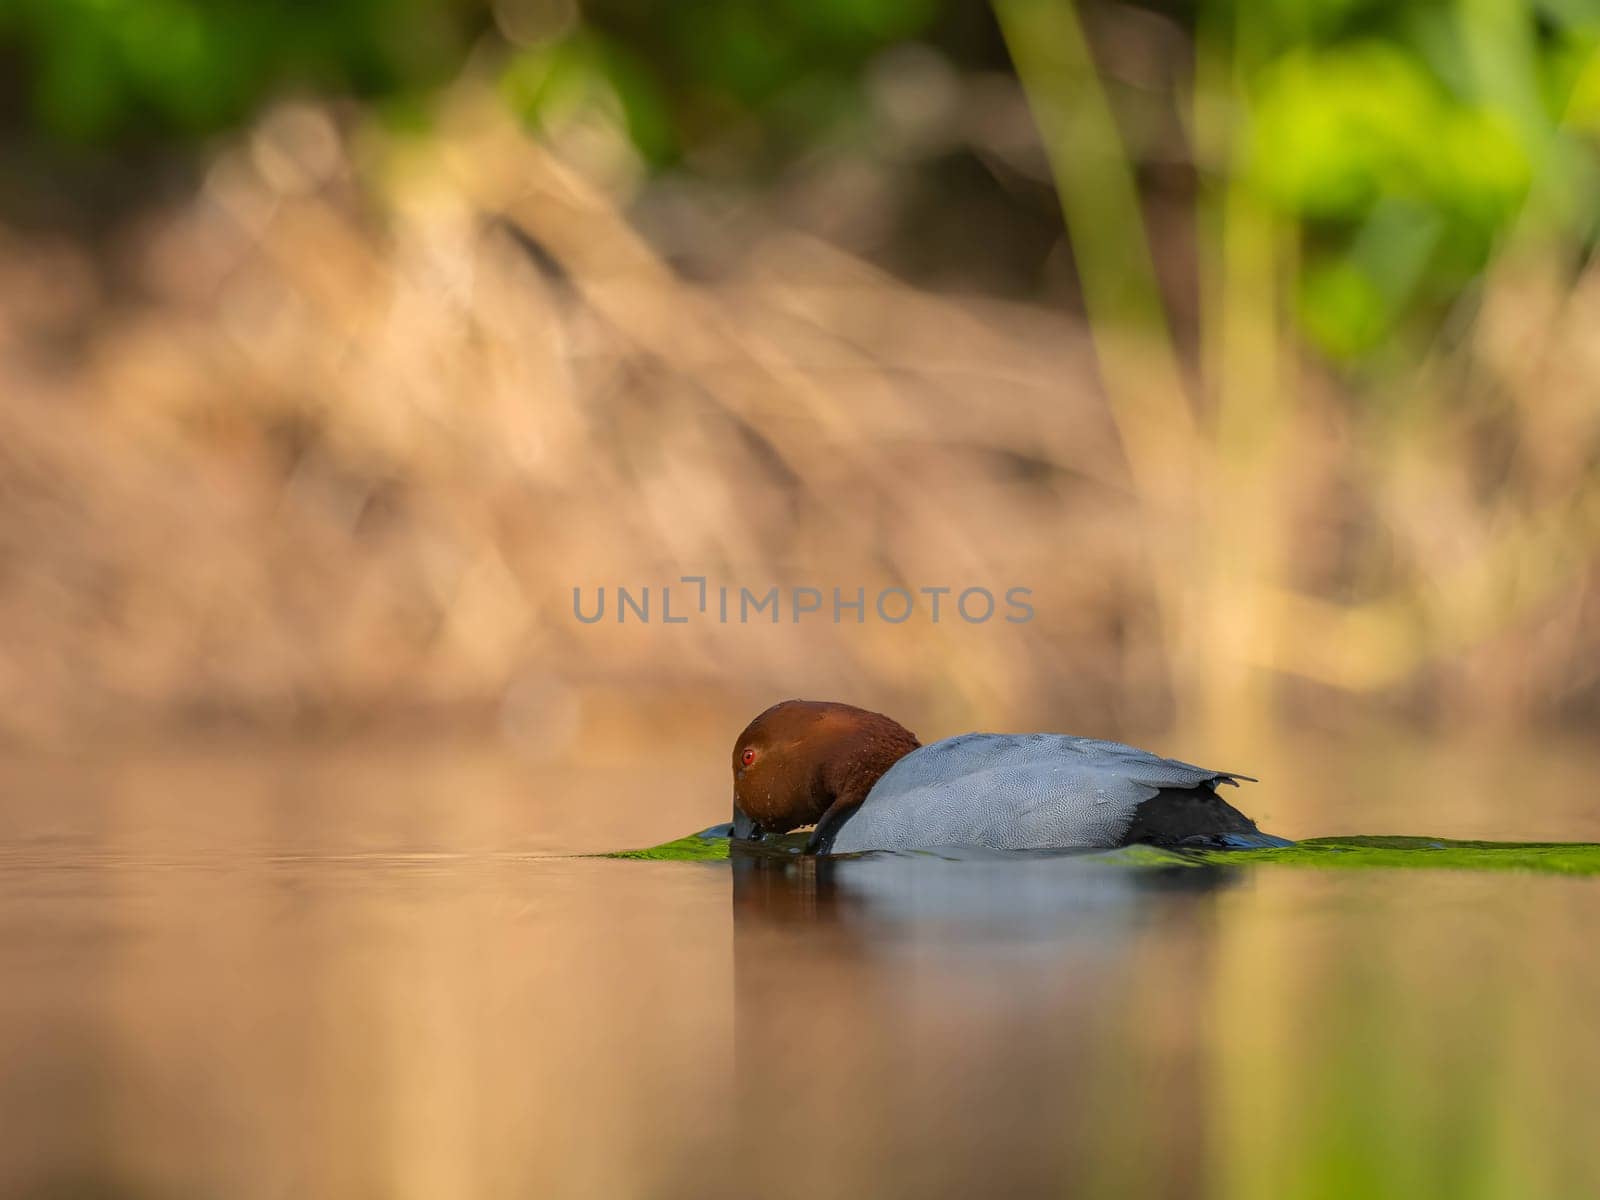 Common pochard floats peacefully on the water, its vibrant plumage reflecting in the serene green scenery, capturing a moment of natural beauty.